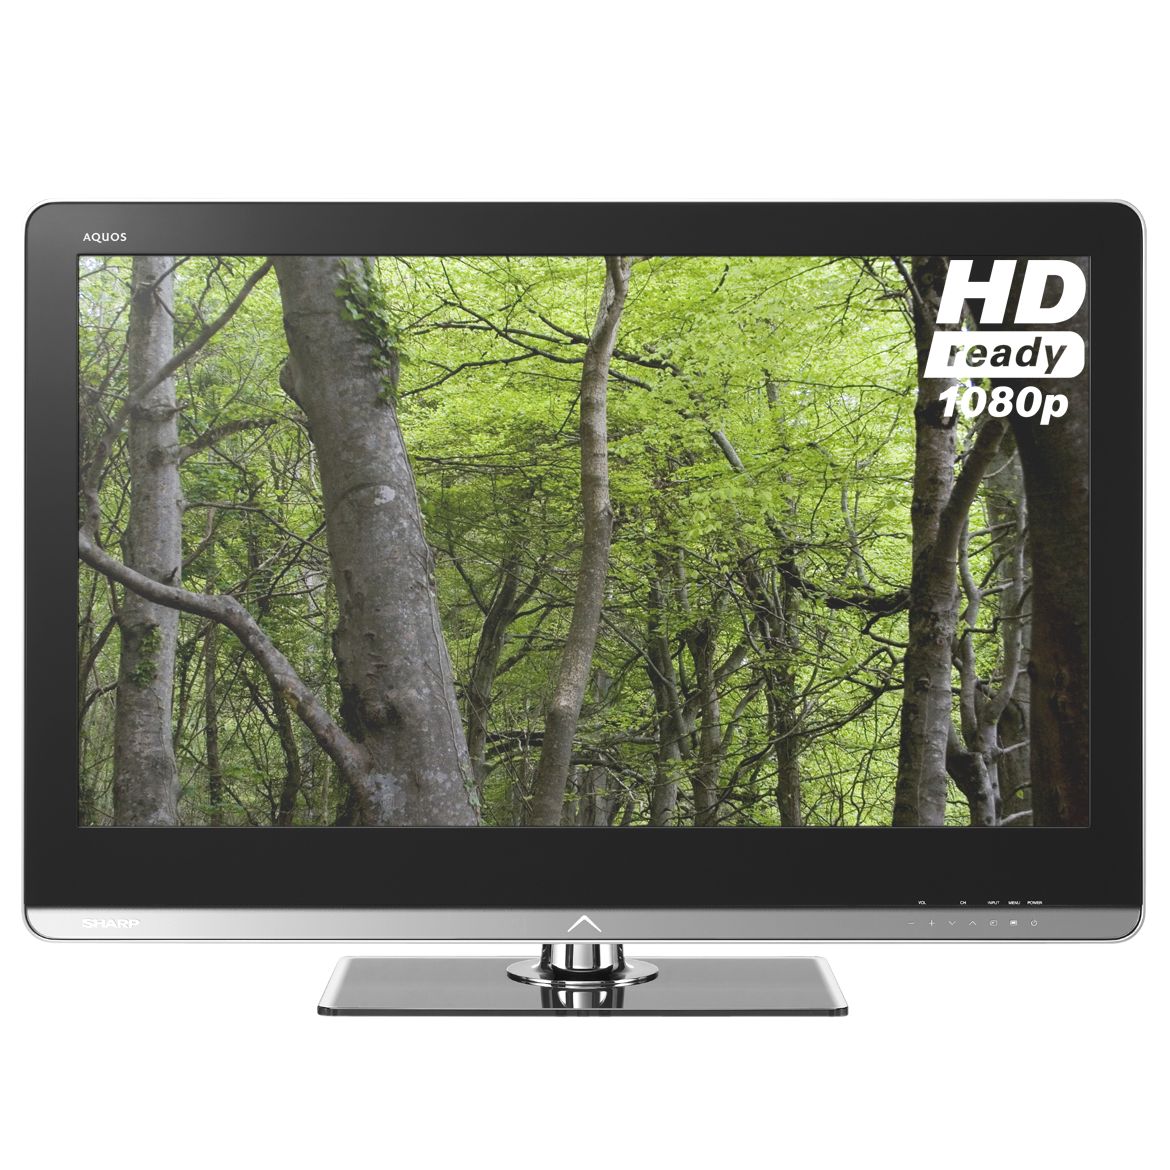 Sharp Quattron LC40LE811E LCD/LED HD 1080p Digital Television, 40 Inch with Built-in Freeview HD at John Lewis